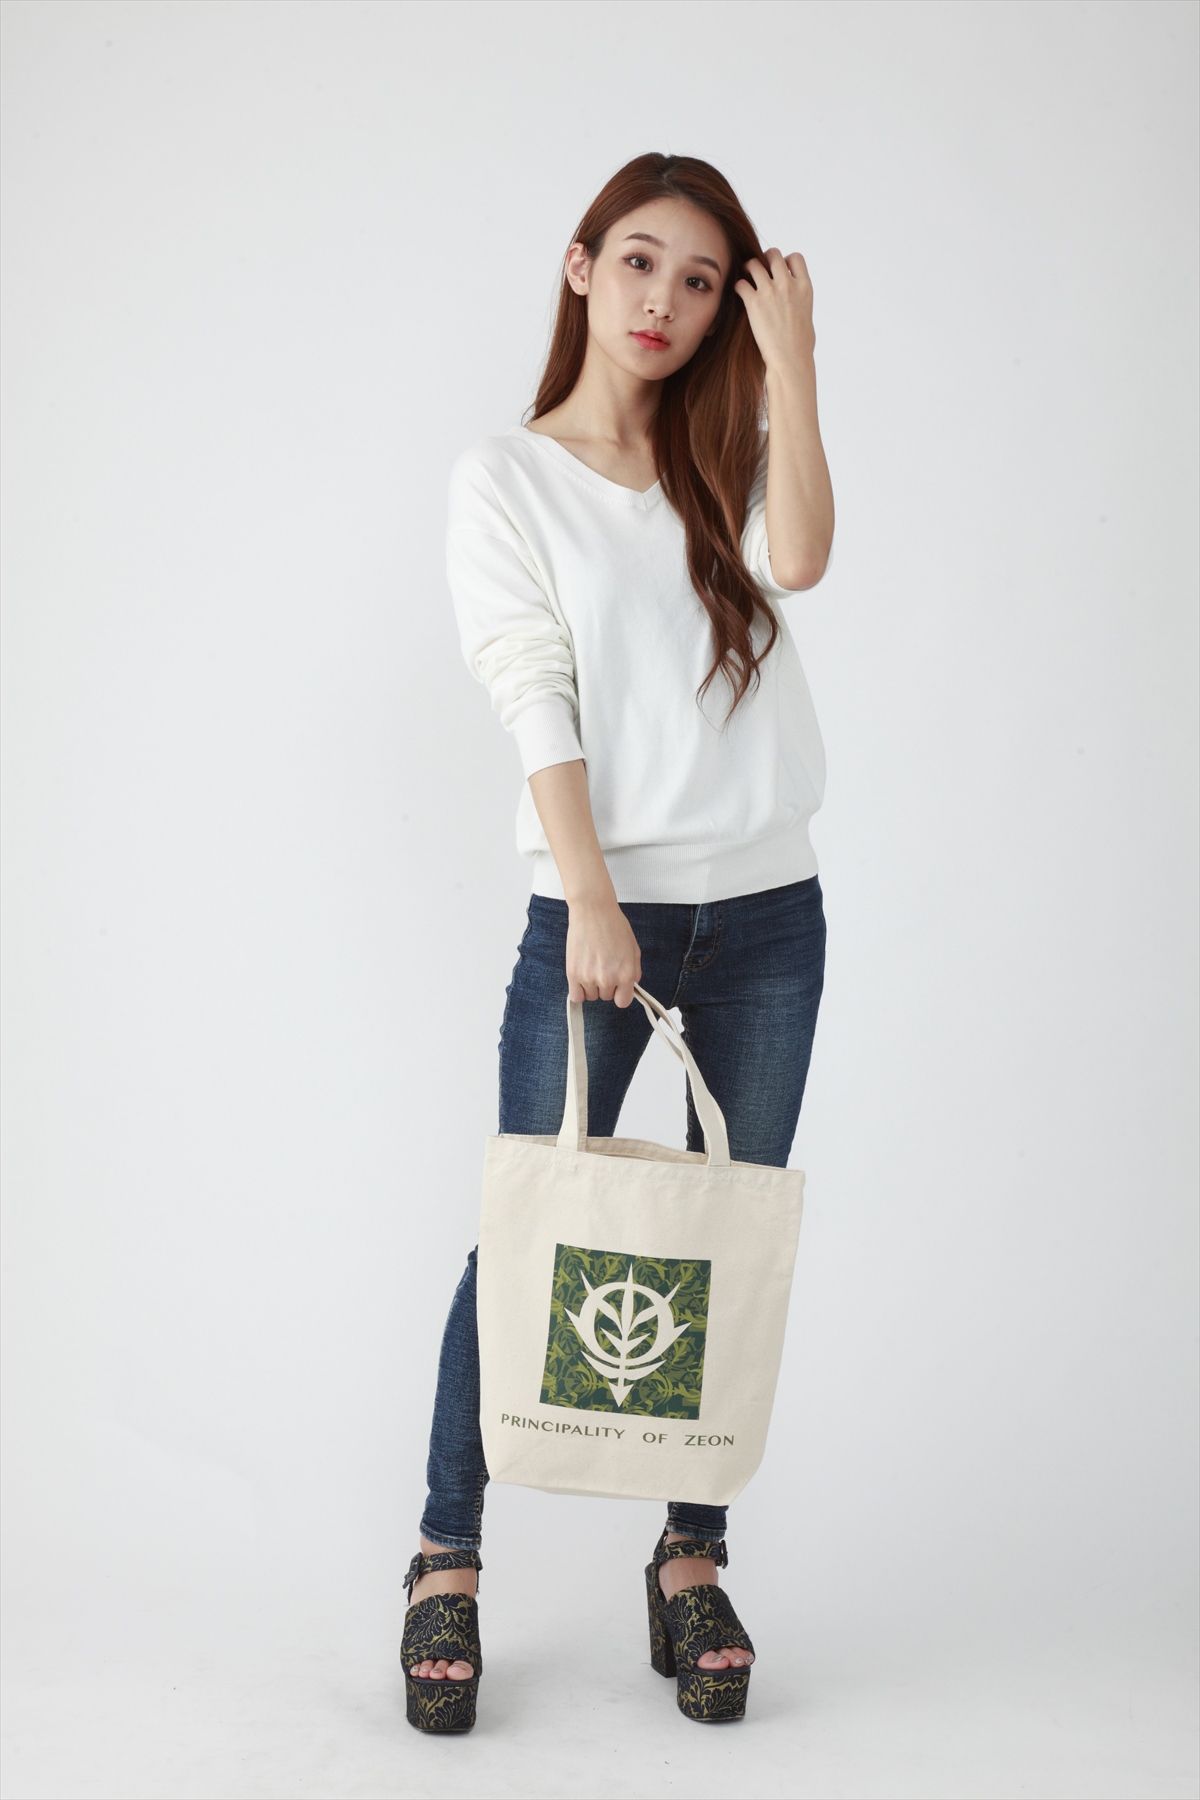 Mobile Suit Gundam Camouflage Tote Bag